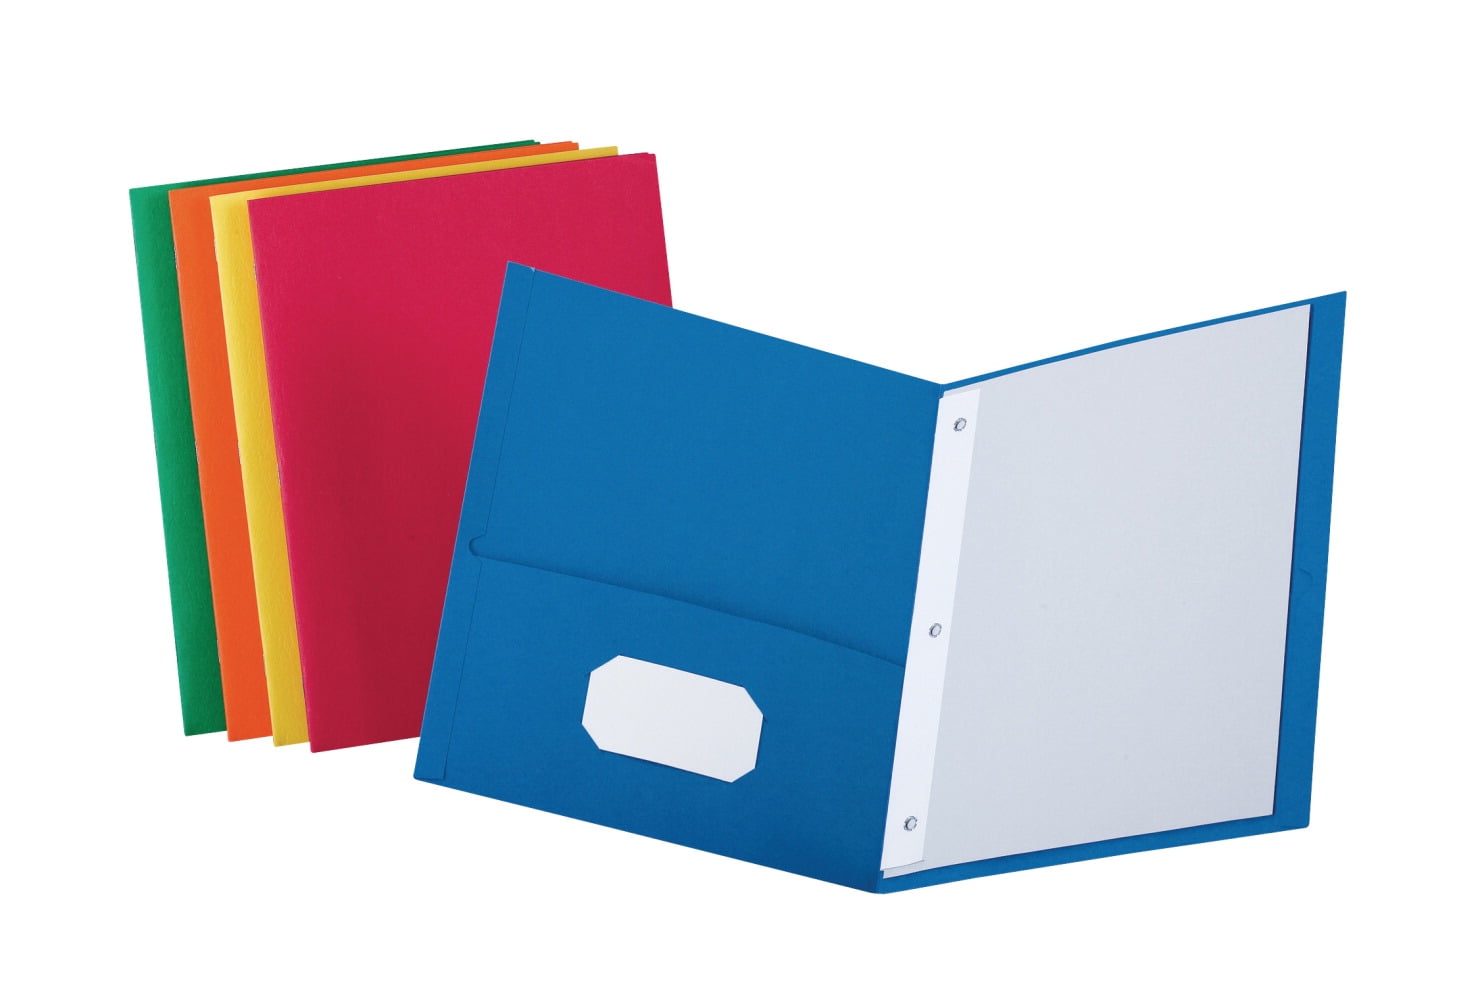 Chaiselong Foresee Hæl Oxford 2 Pocket Folders with Fasteners, Assorted Colors, Pack of 25 -  Walmart.com